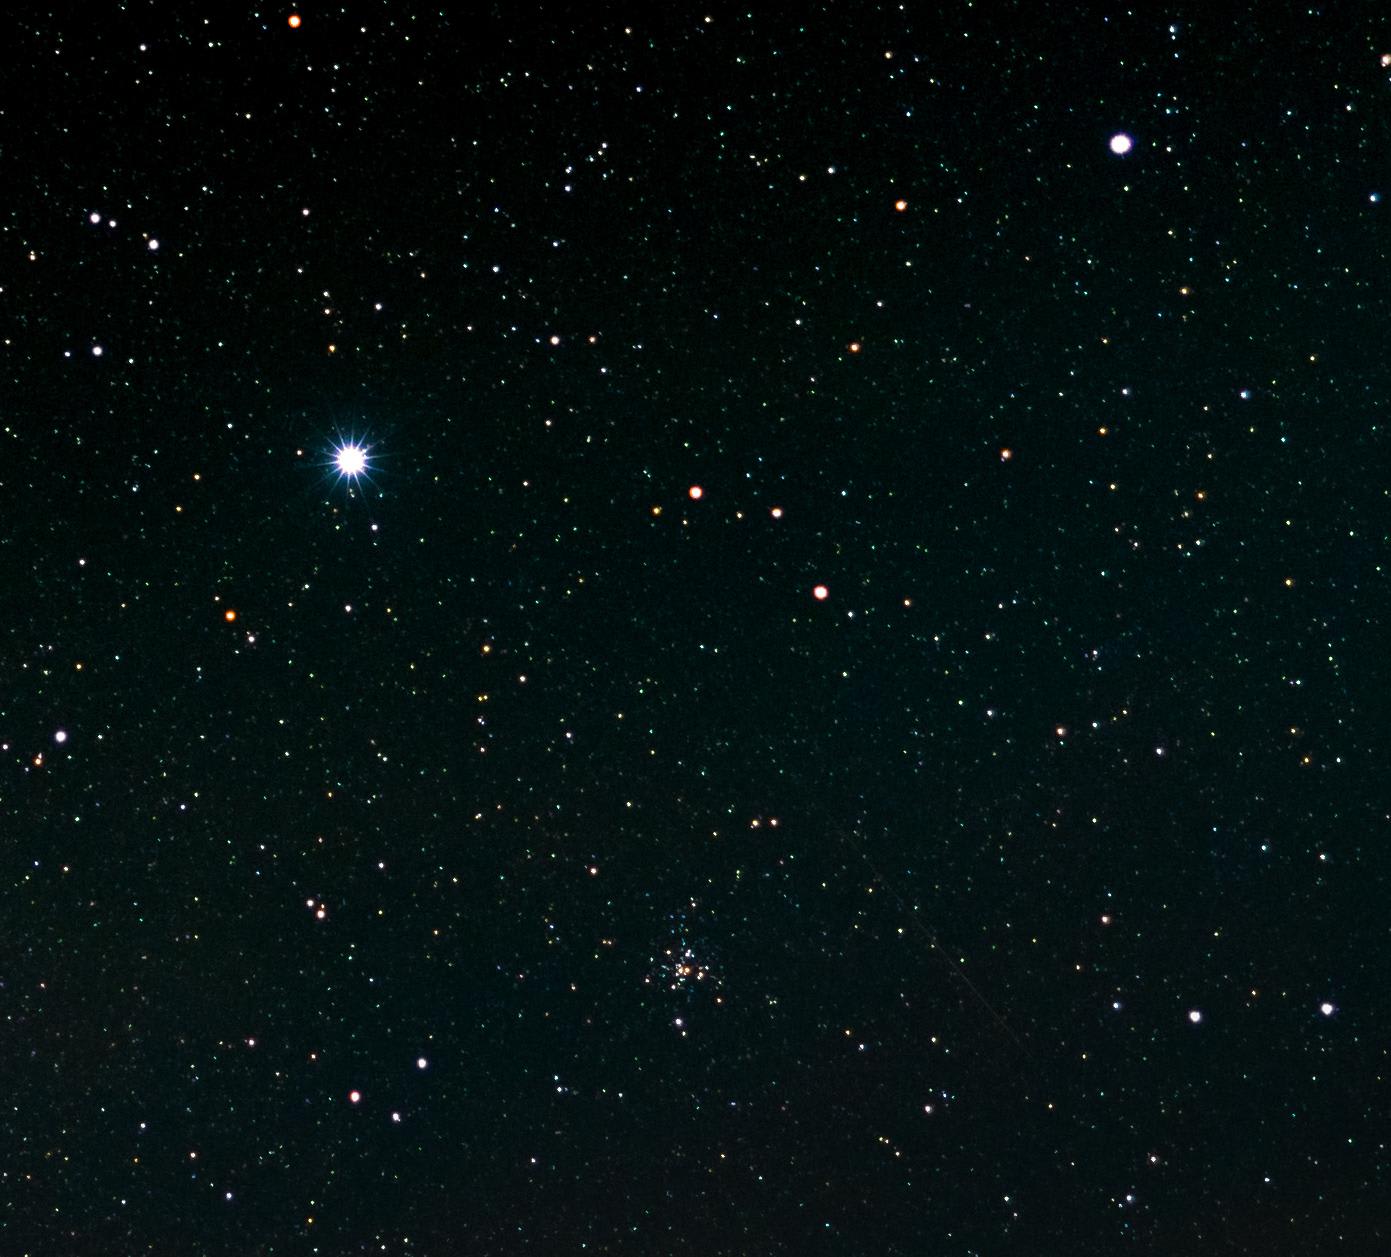 Sirius (The Dog Star), M41 Open ("Galactic") Star Cluster, and Mirzam